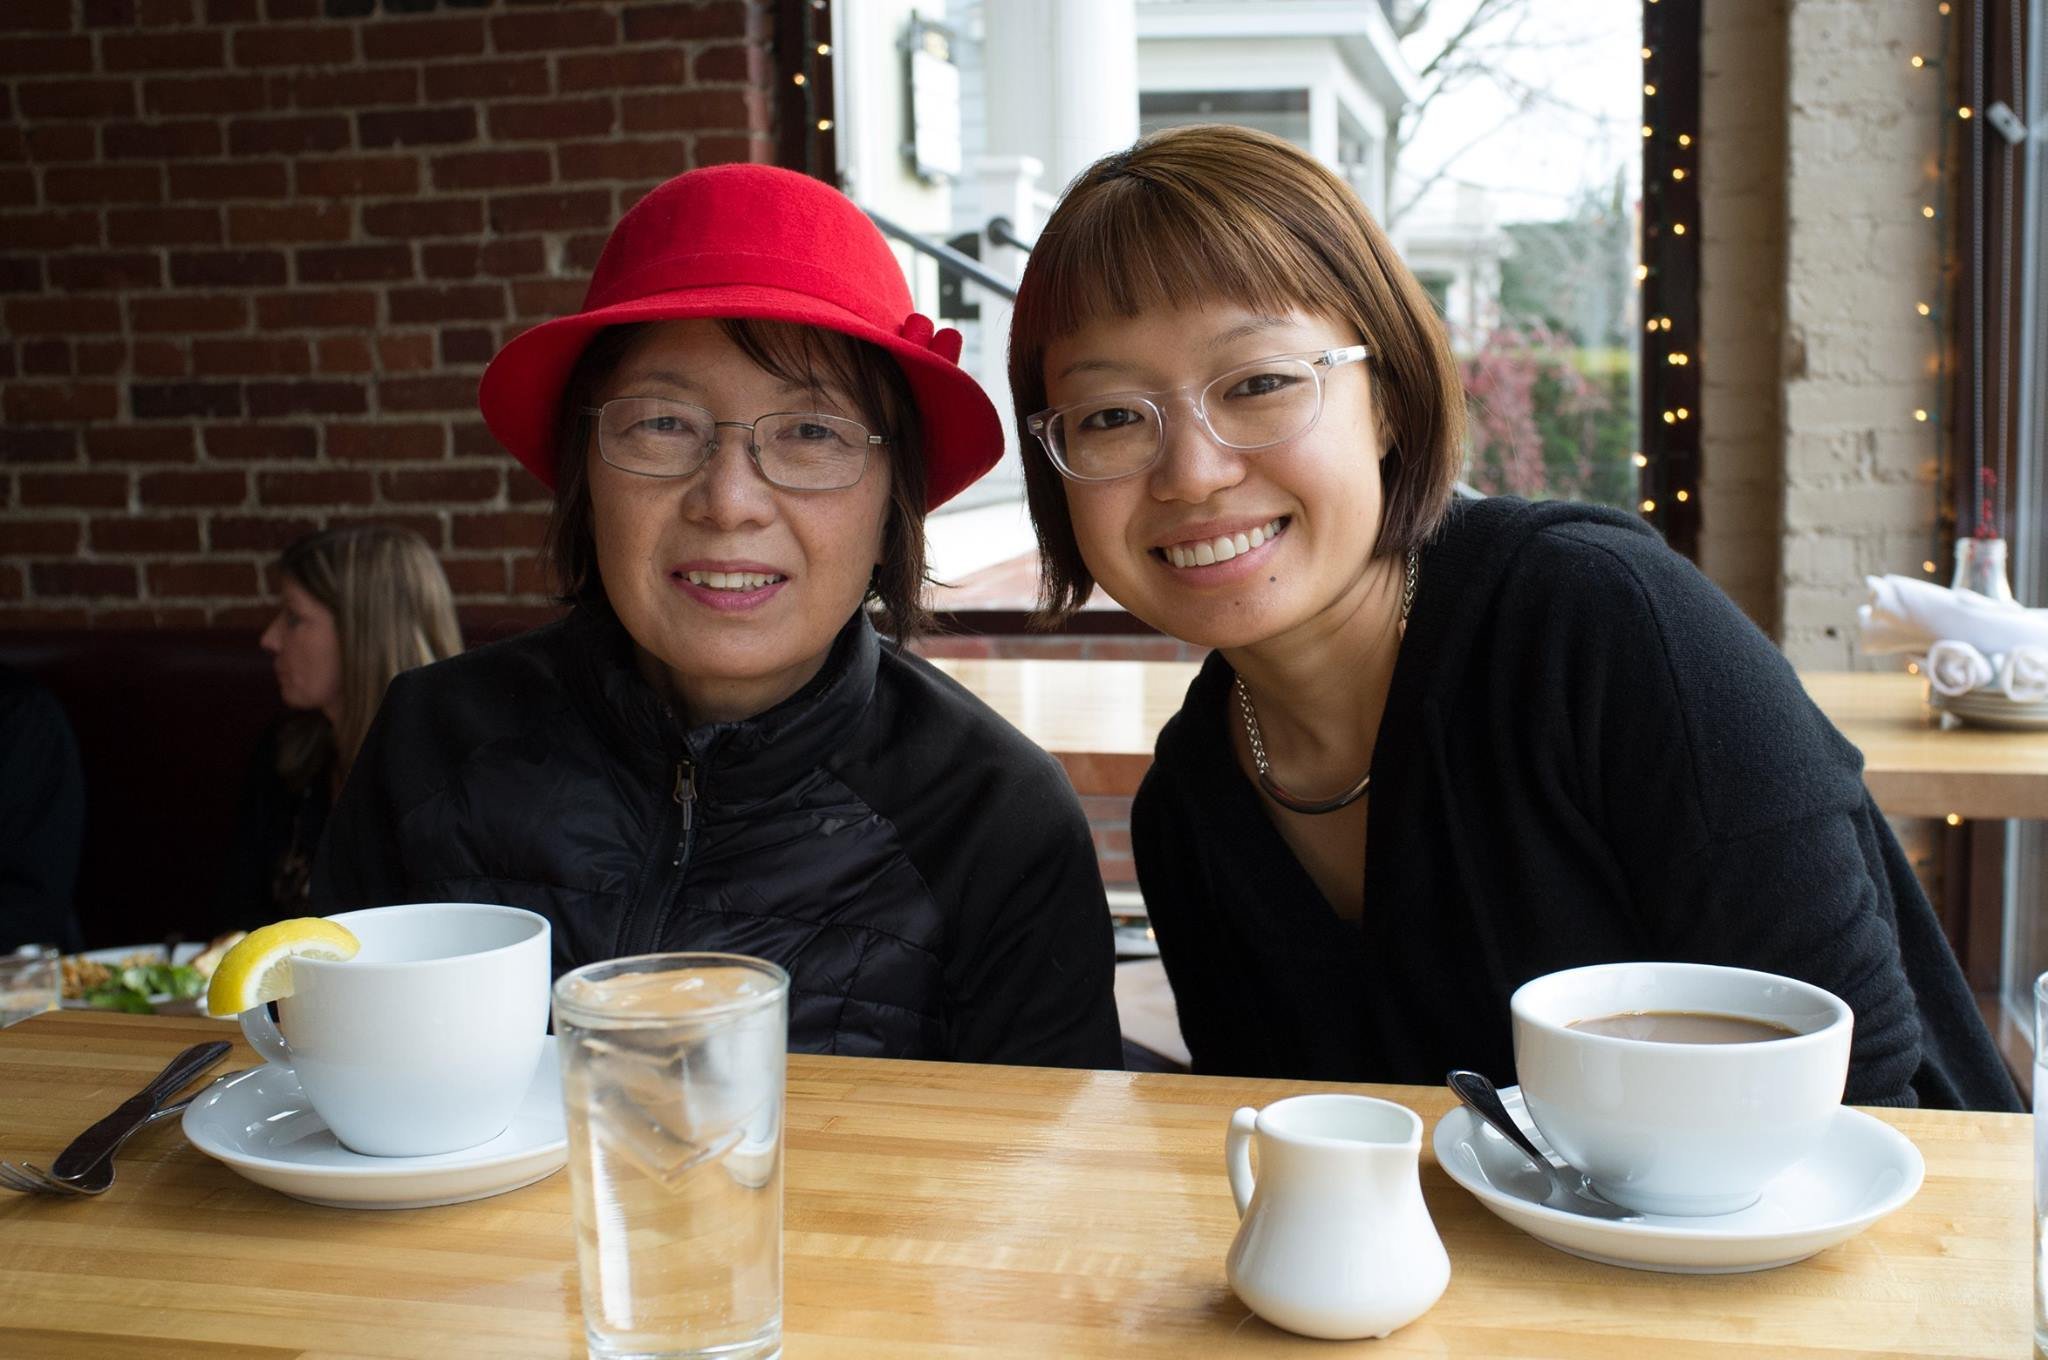  “My mom and me in Cambridge, MA, shortly after her diagnosis and moving in with me.” - Caroline Hu 